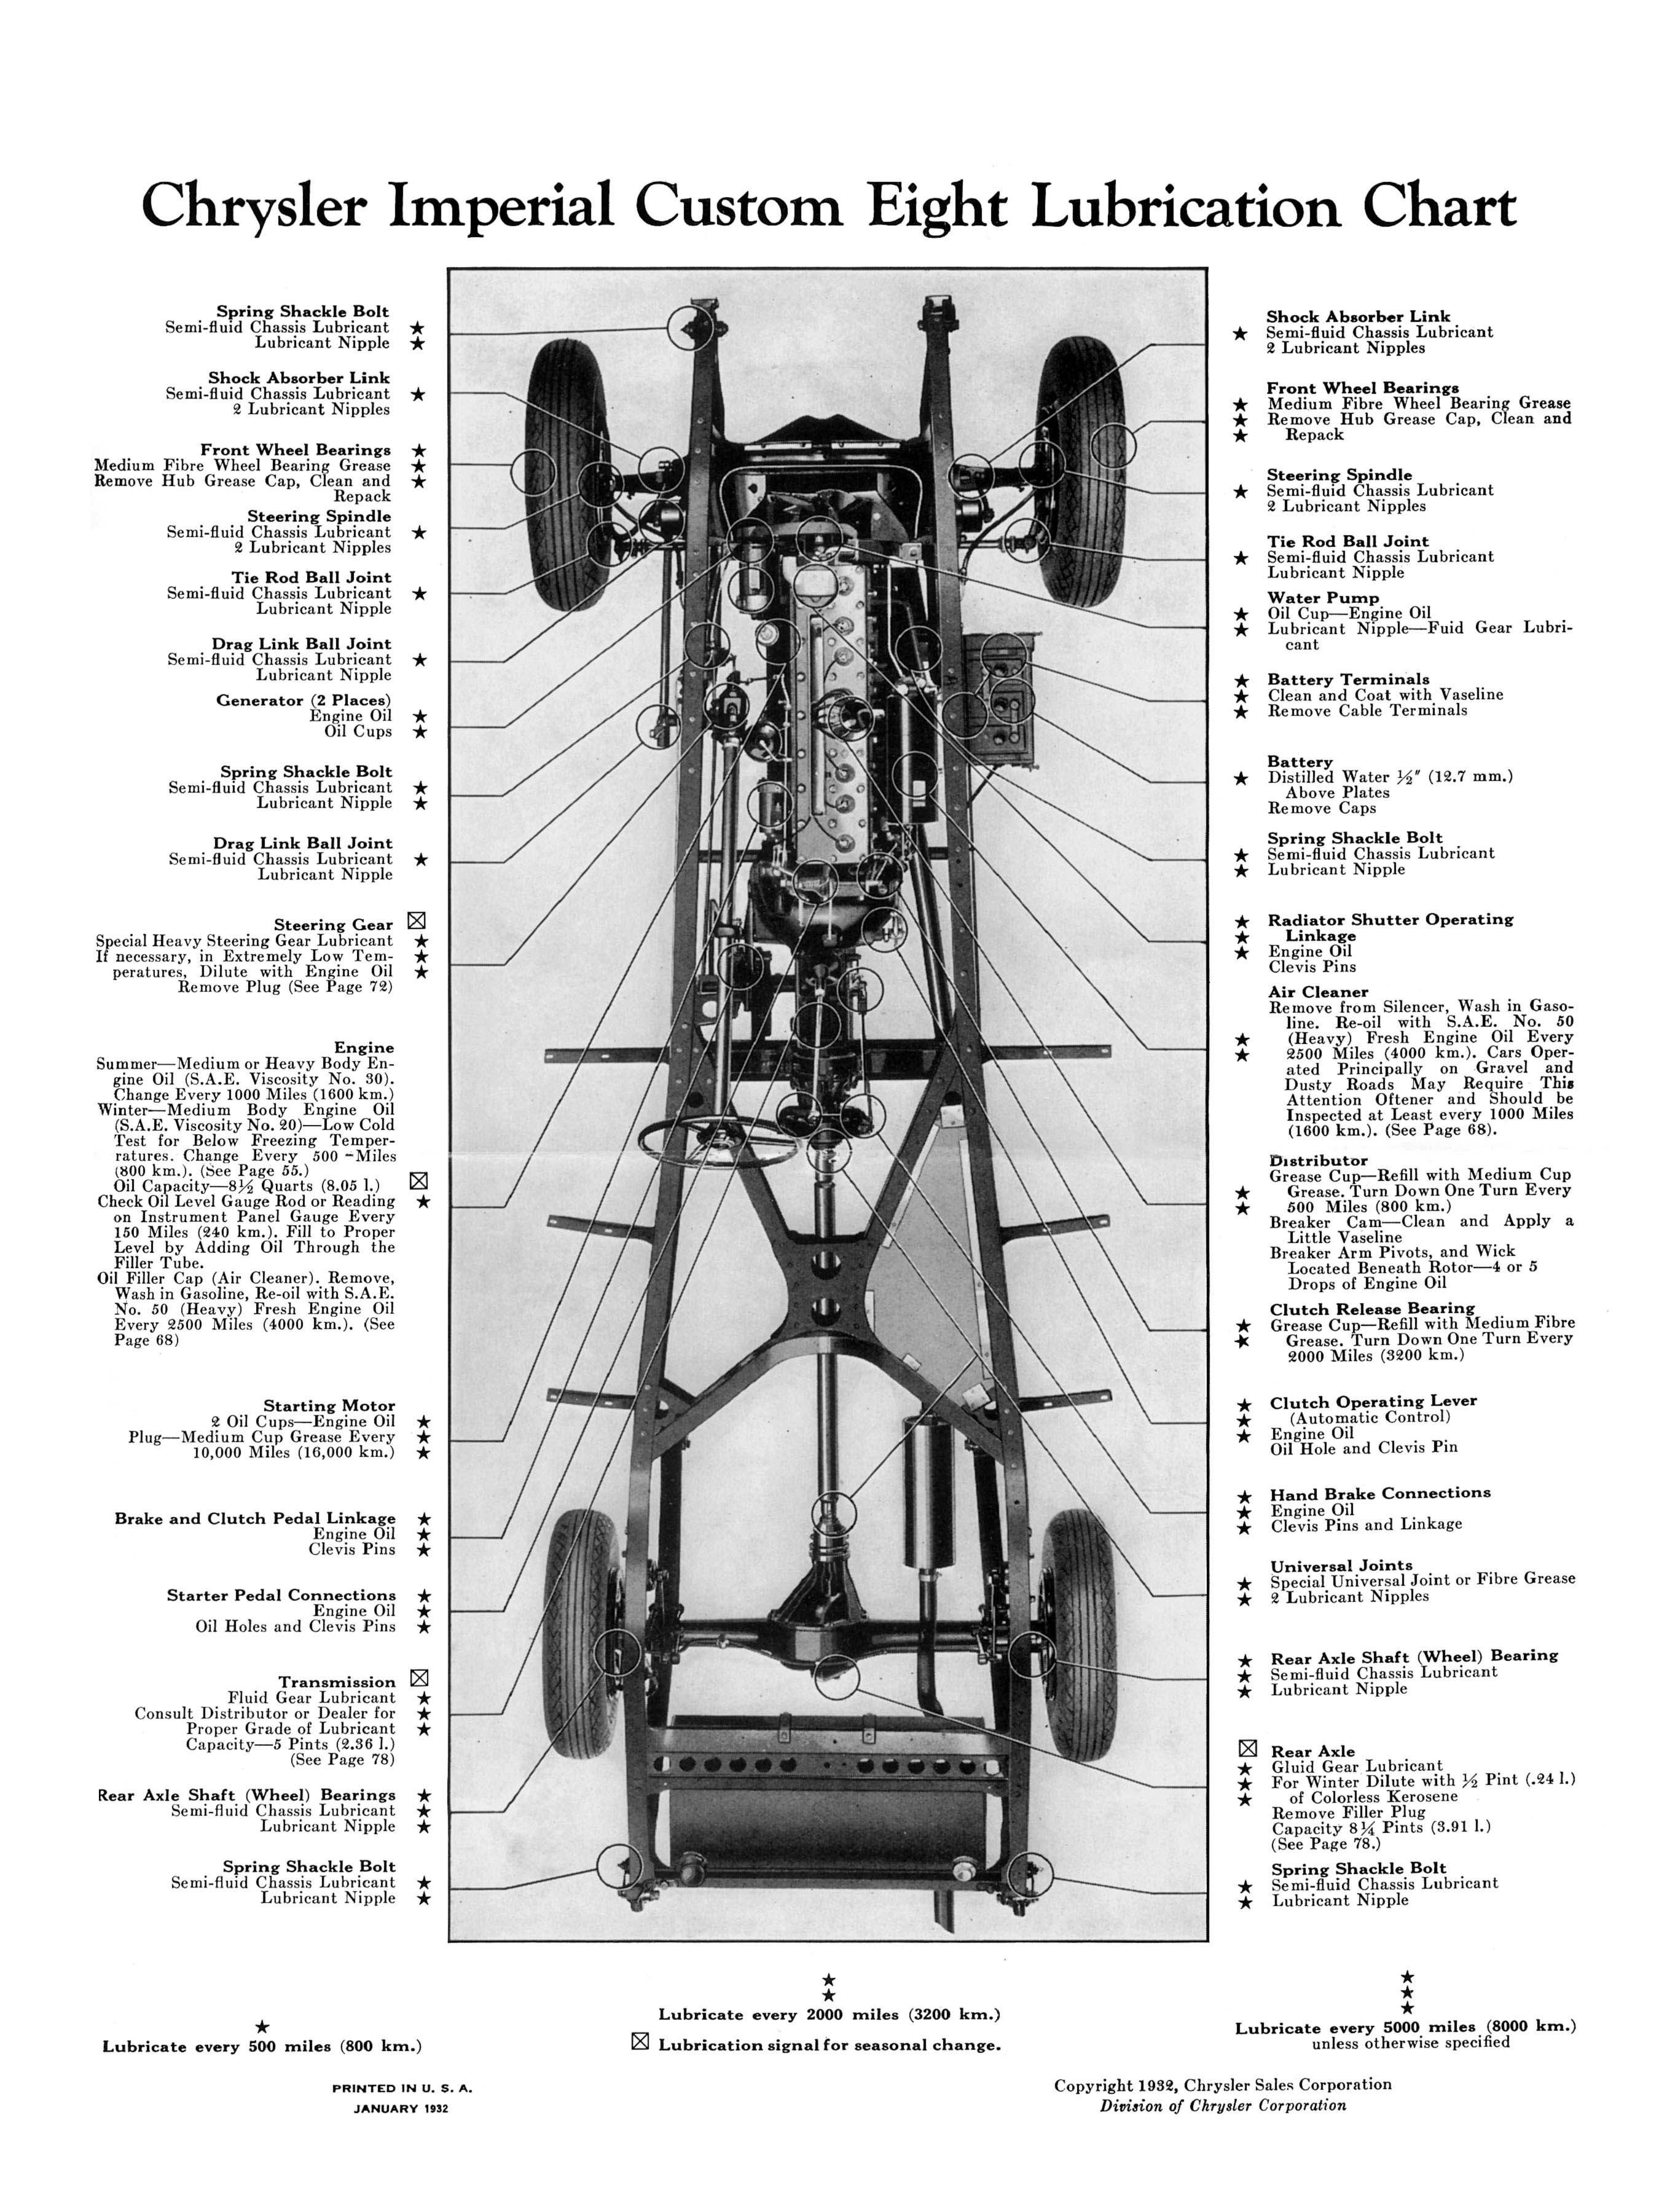 1932 Chrysler Imperial Instruction Book Page 28